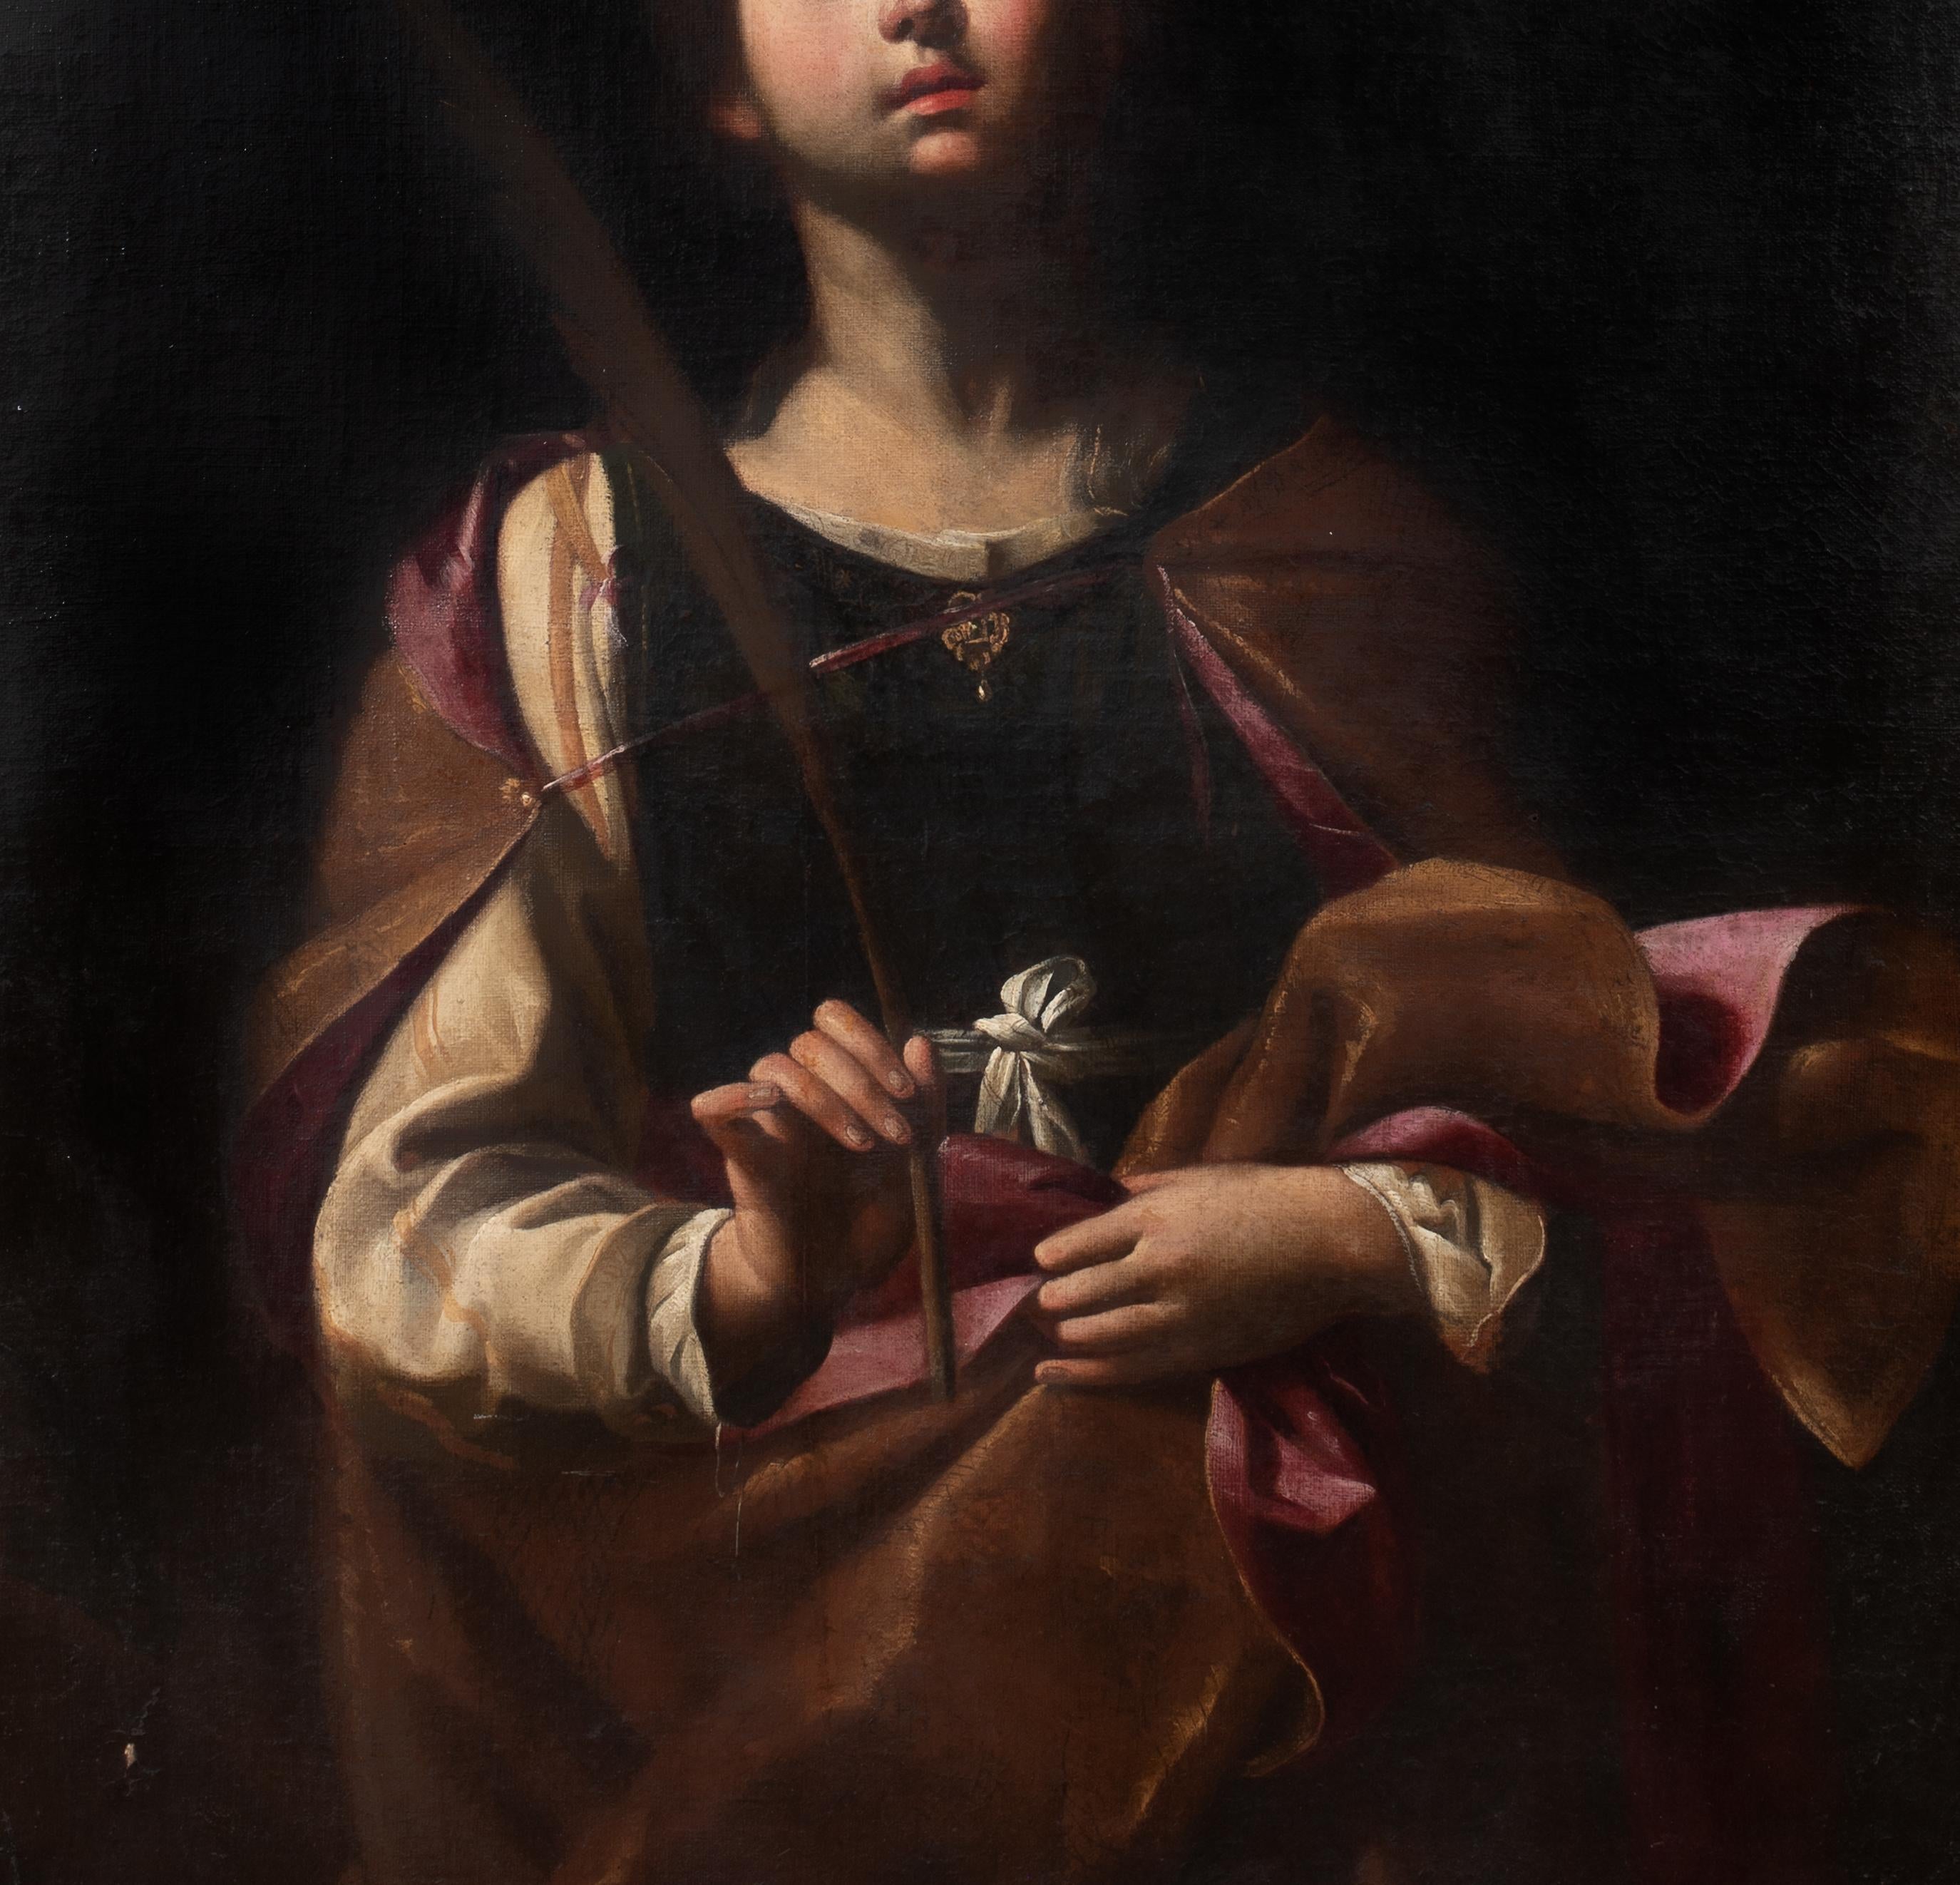 Saint Catherine Of Alexandria, 17th Century 

workshop of GUIDO RENI (1575-1642)

Large 17th century Italian Old Master depiction of the virgin martyr Saint Catherine Of Alexandria, oil on canvas. Excellent quality and condition circa 1620 depiction